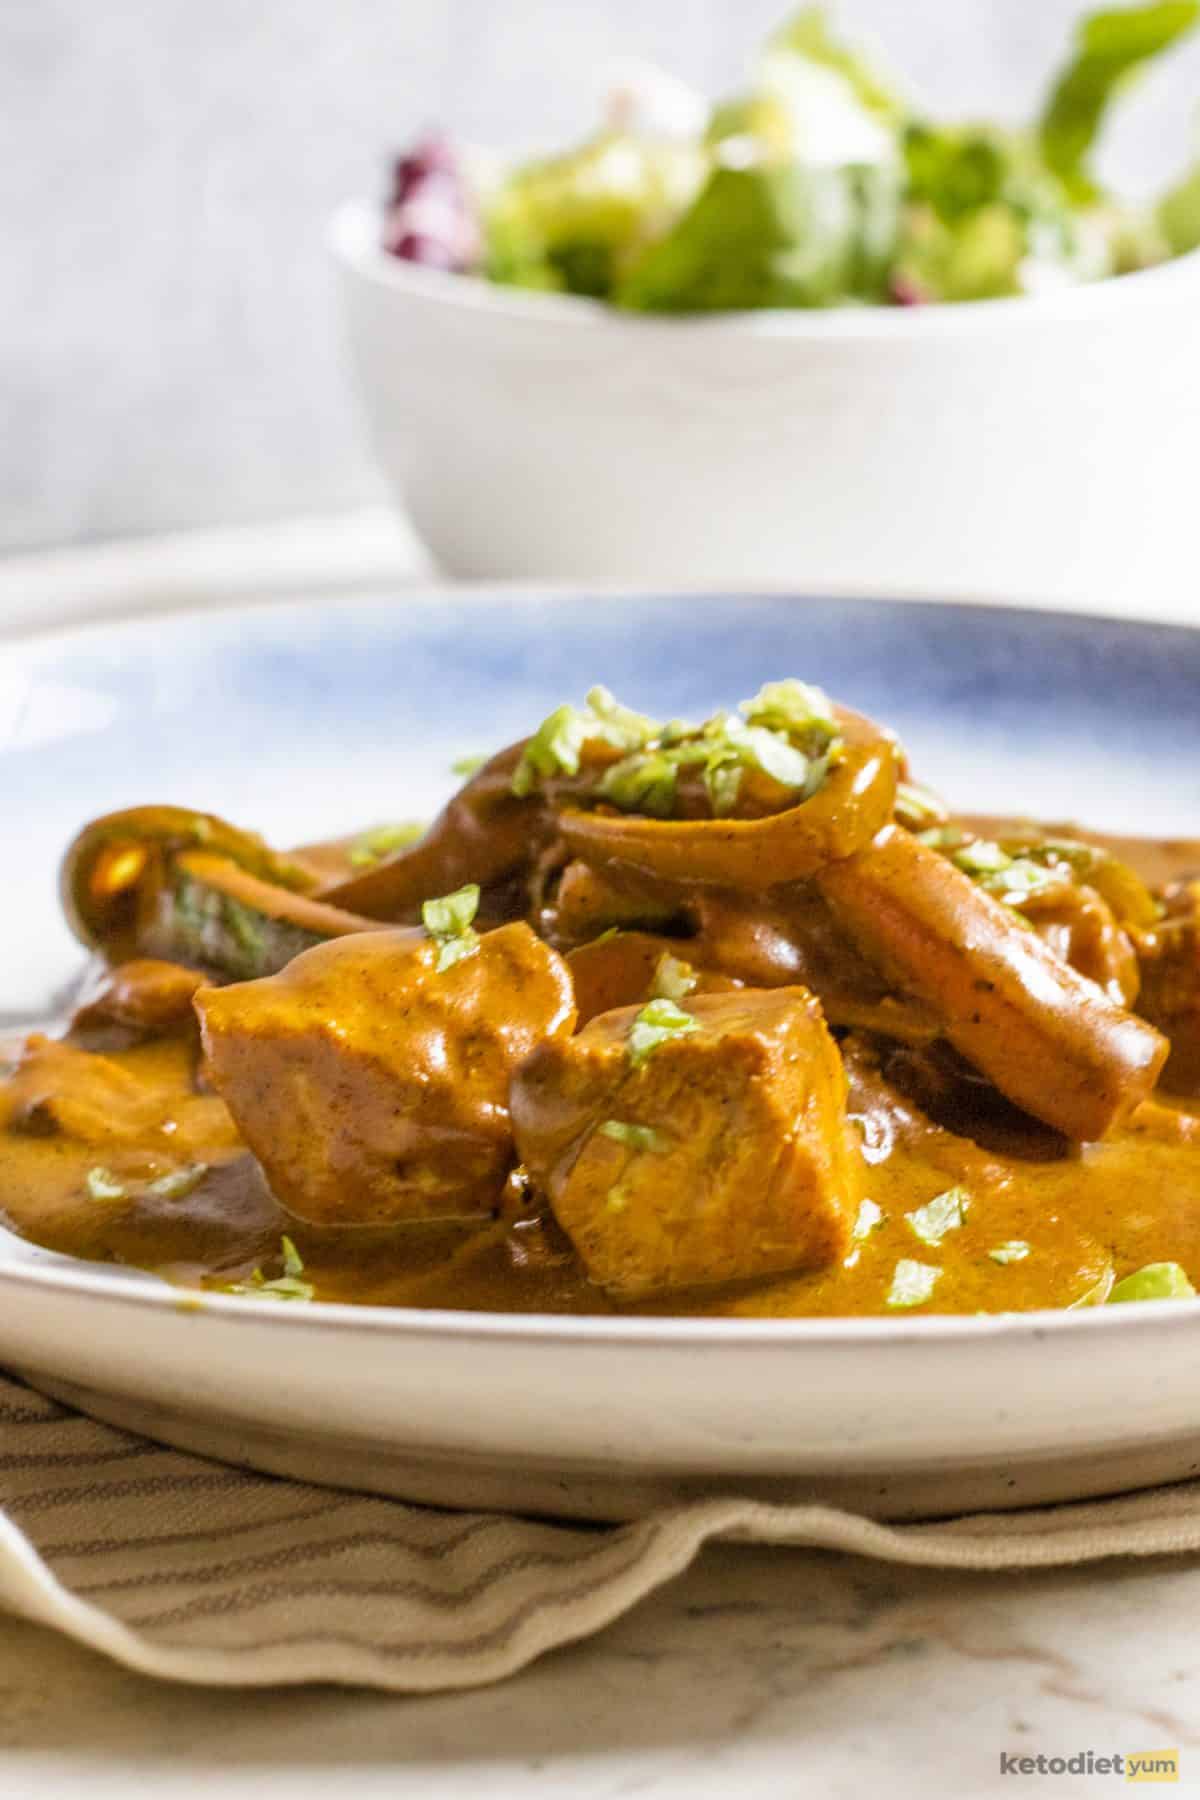 A rich, creamy and filling low carb salmon coconut curry served on a white and blue plate